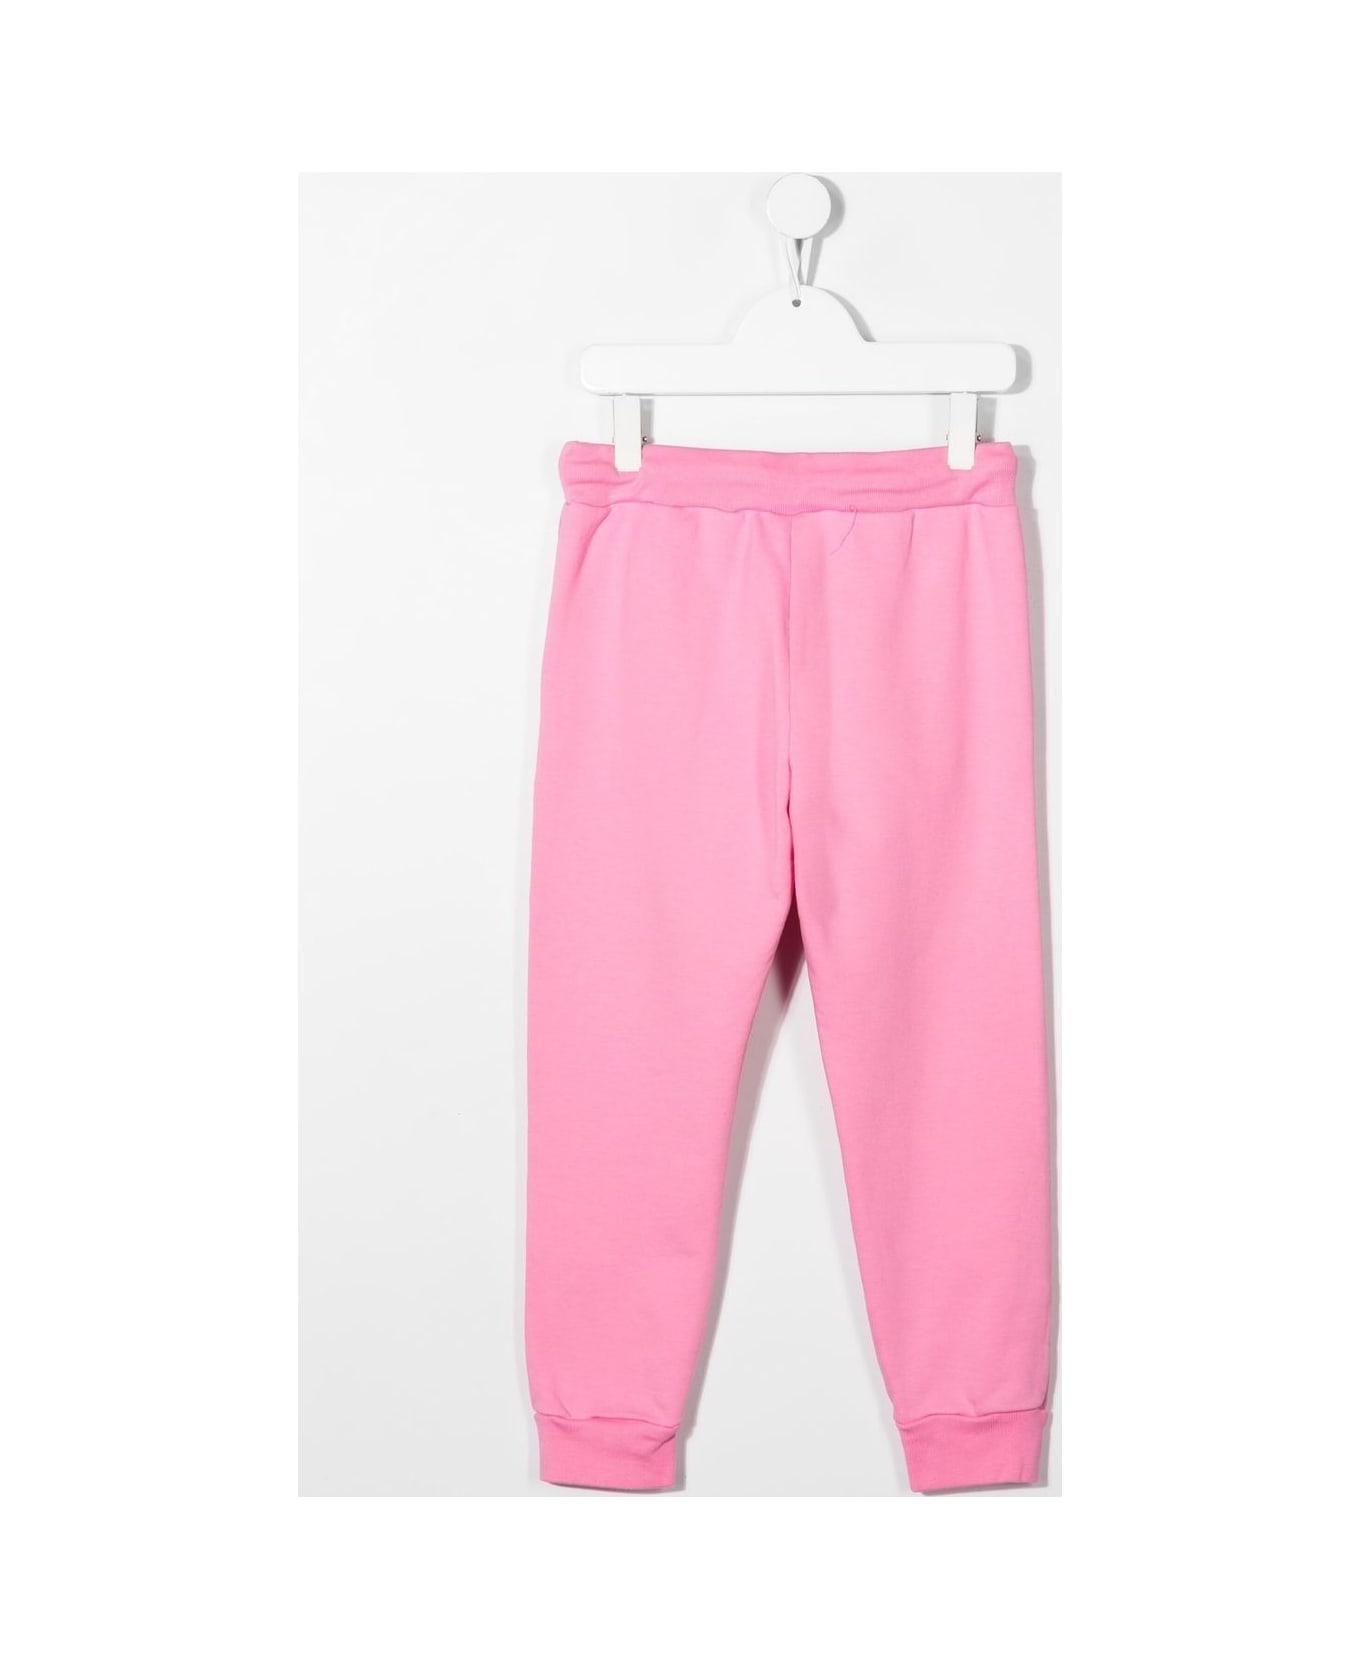 Dsquared2 Kids Pink Joggers With Graffiti Style Contrast Logo - Rosa